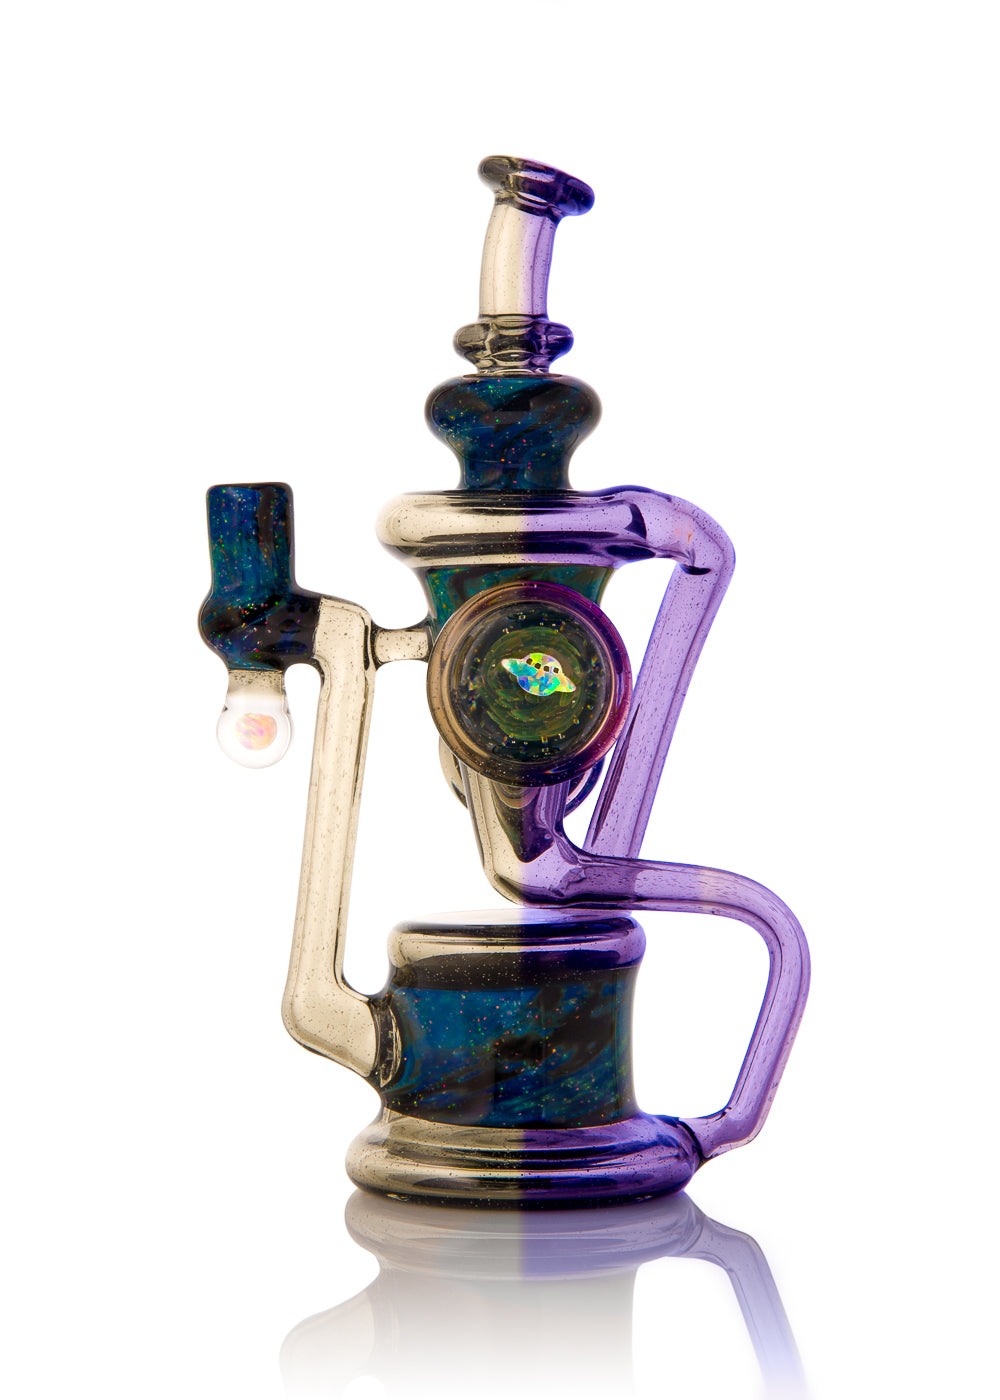 Z Cycler #8 in Blue Medusa CFL and Crushed Opal with Signed Pelican Recycler by Big Z